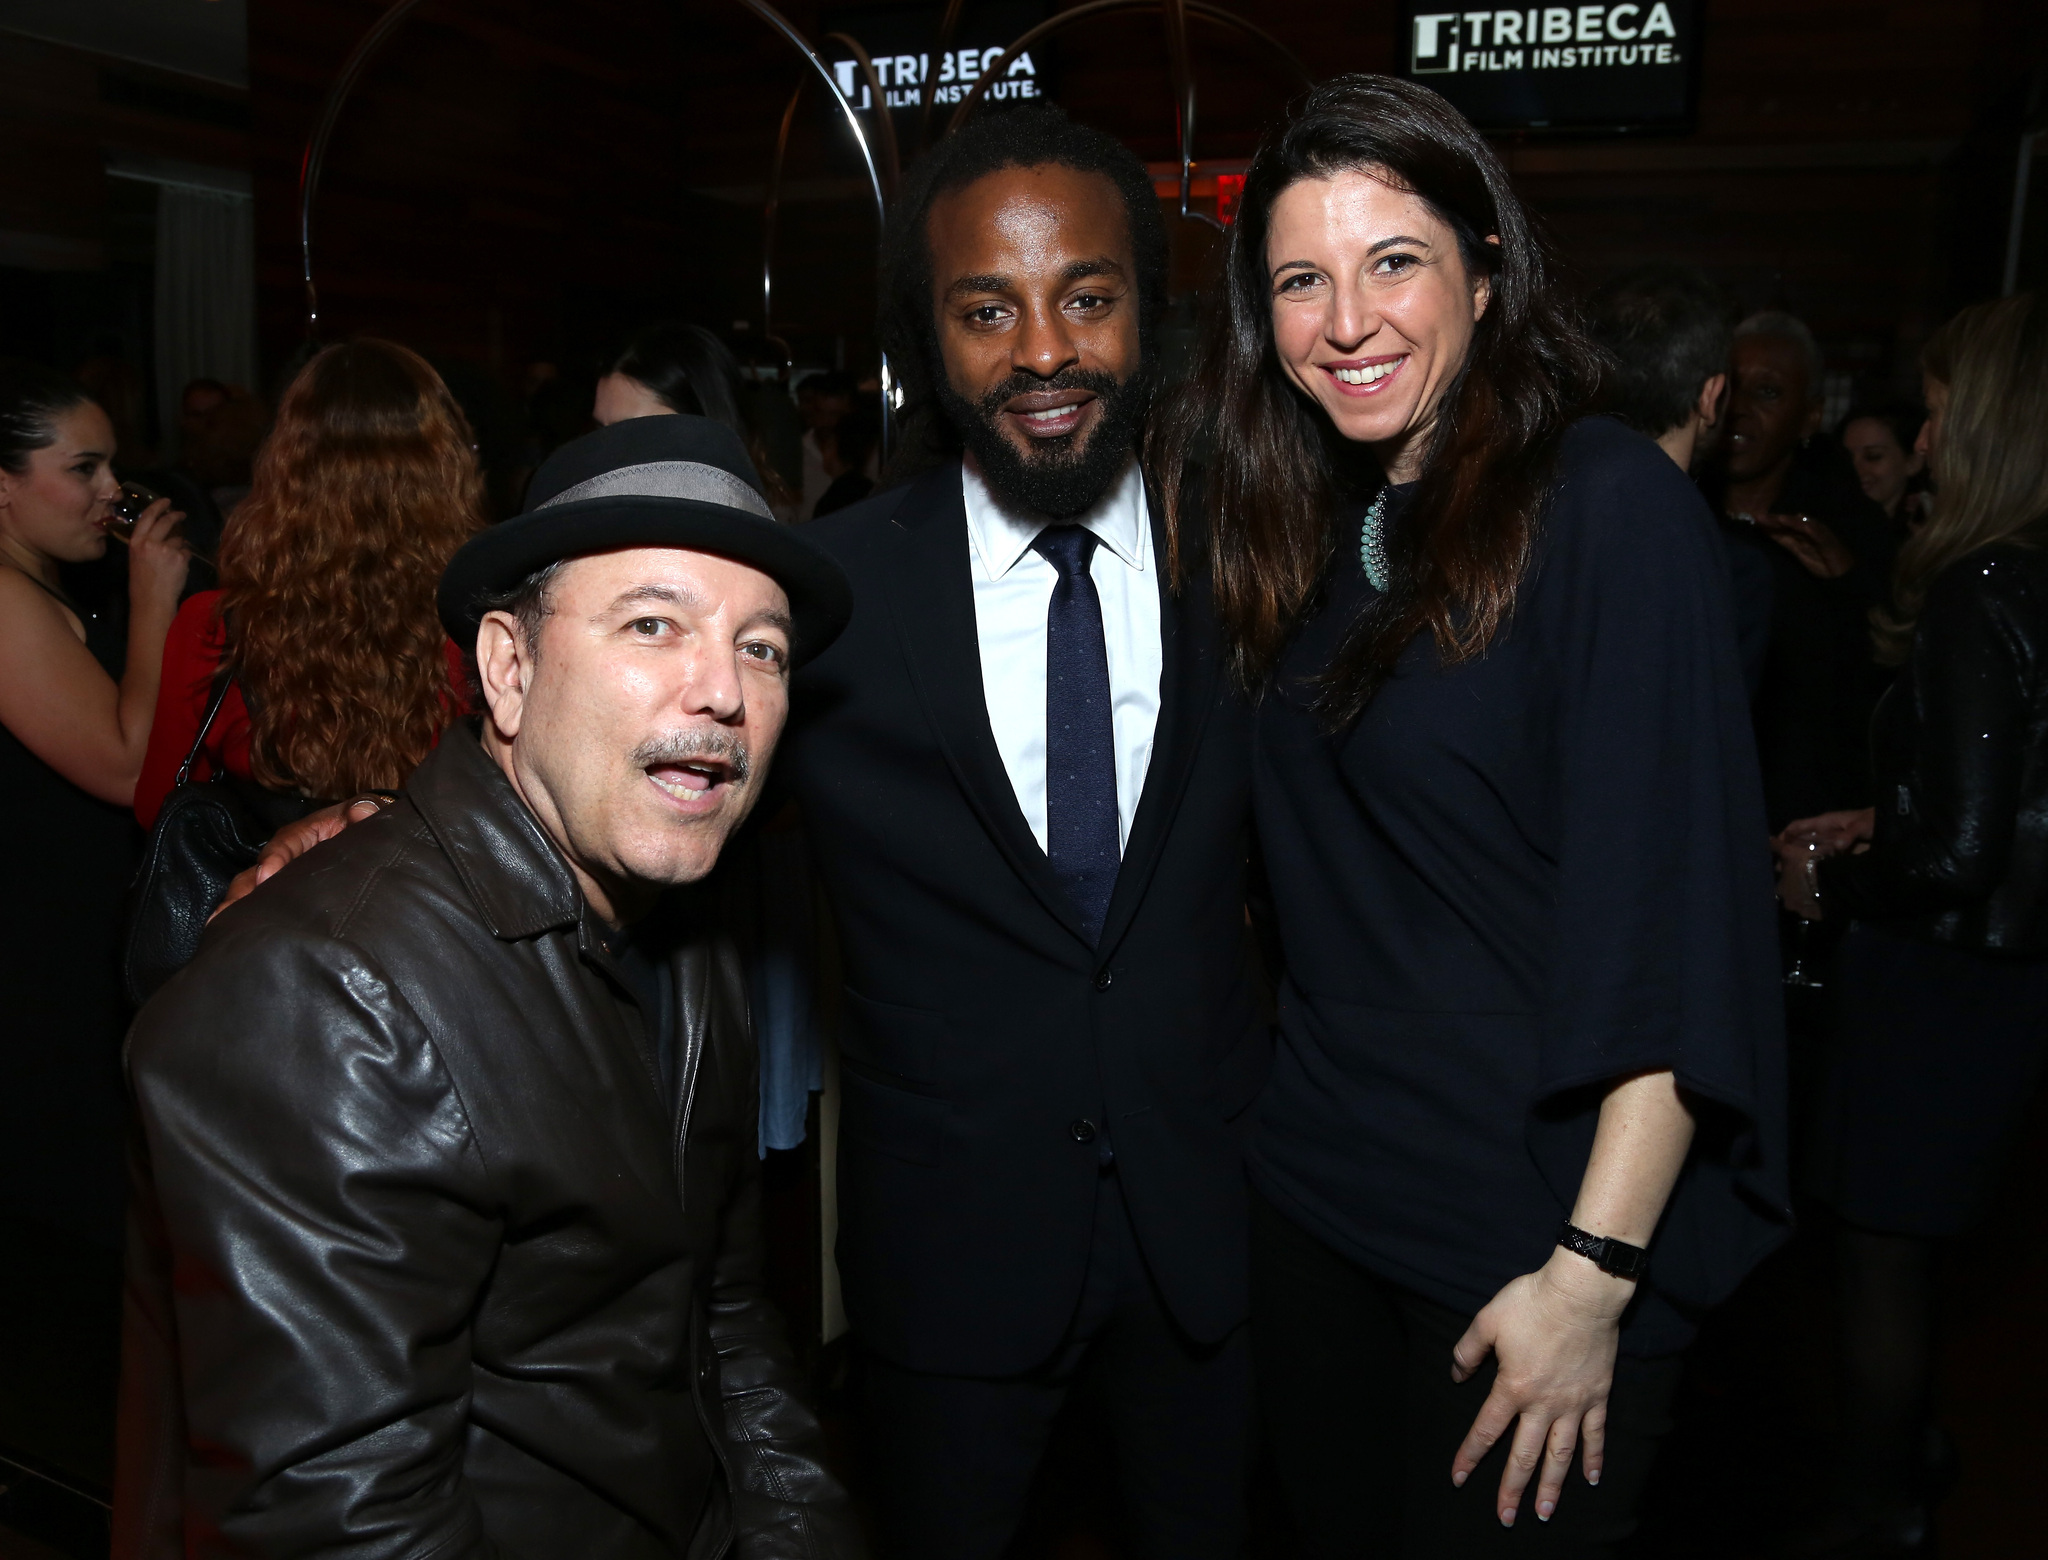 Ruben Blades; John Forte, and Heather Berlin attend the TFI Awards during the 2013 Tribeca Film Festival on April 24, 2013 in New York City.